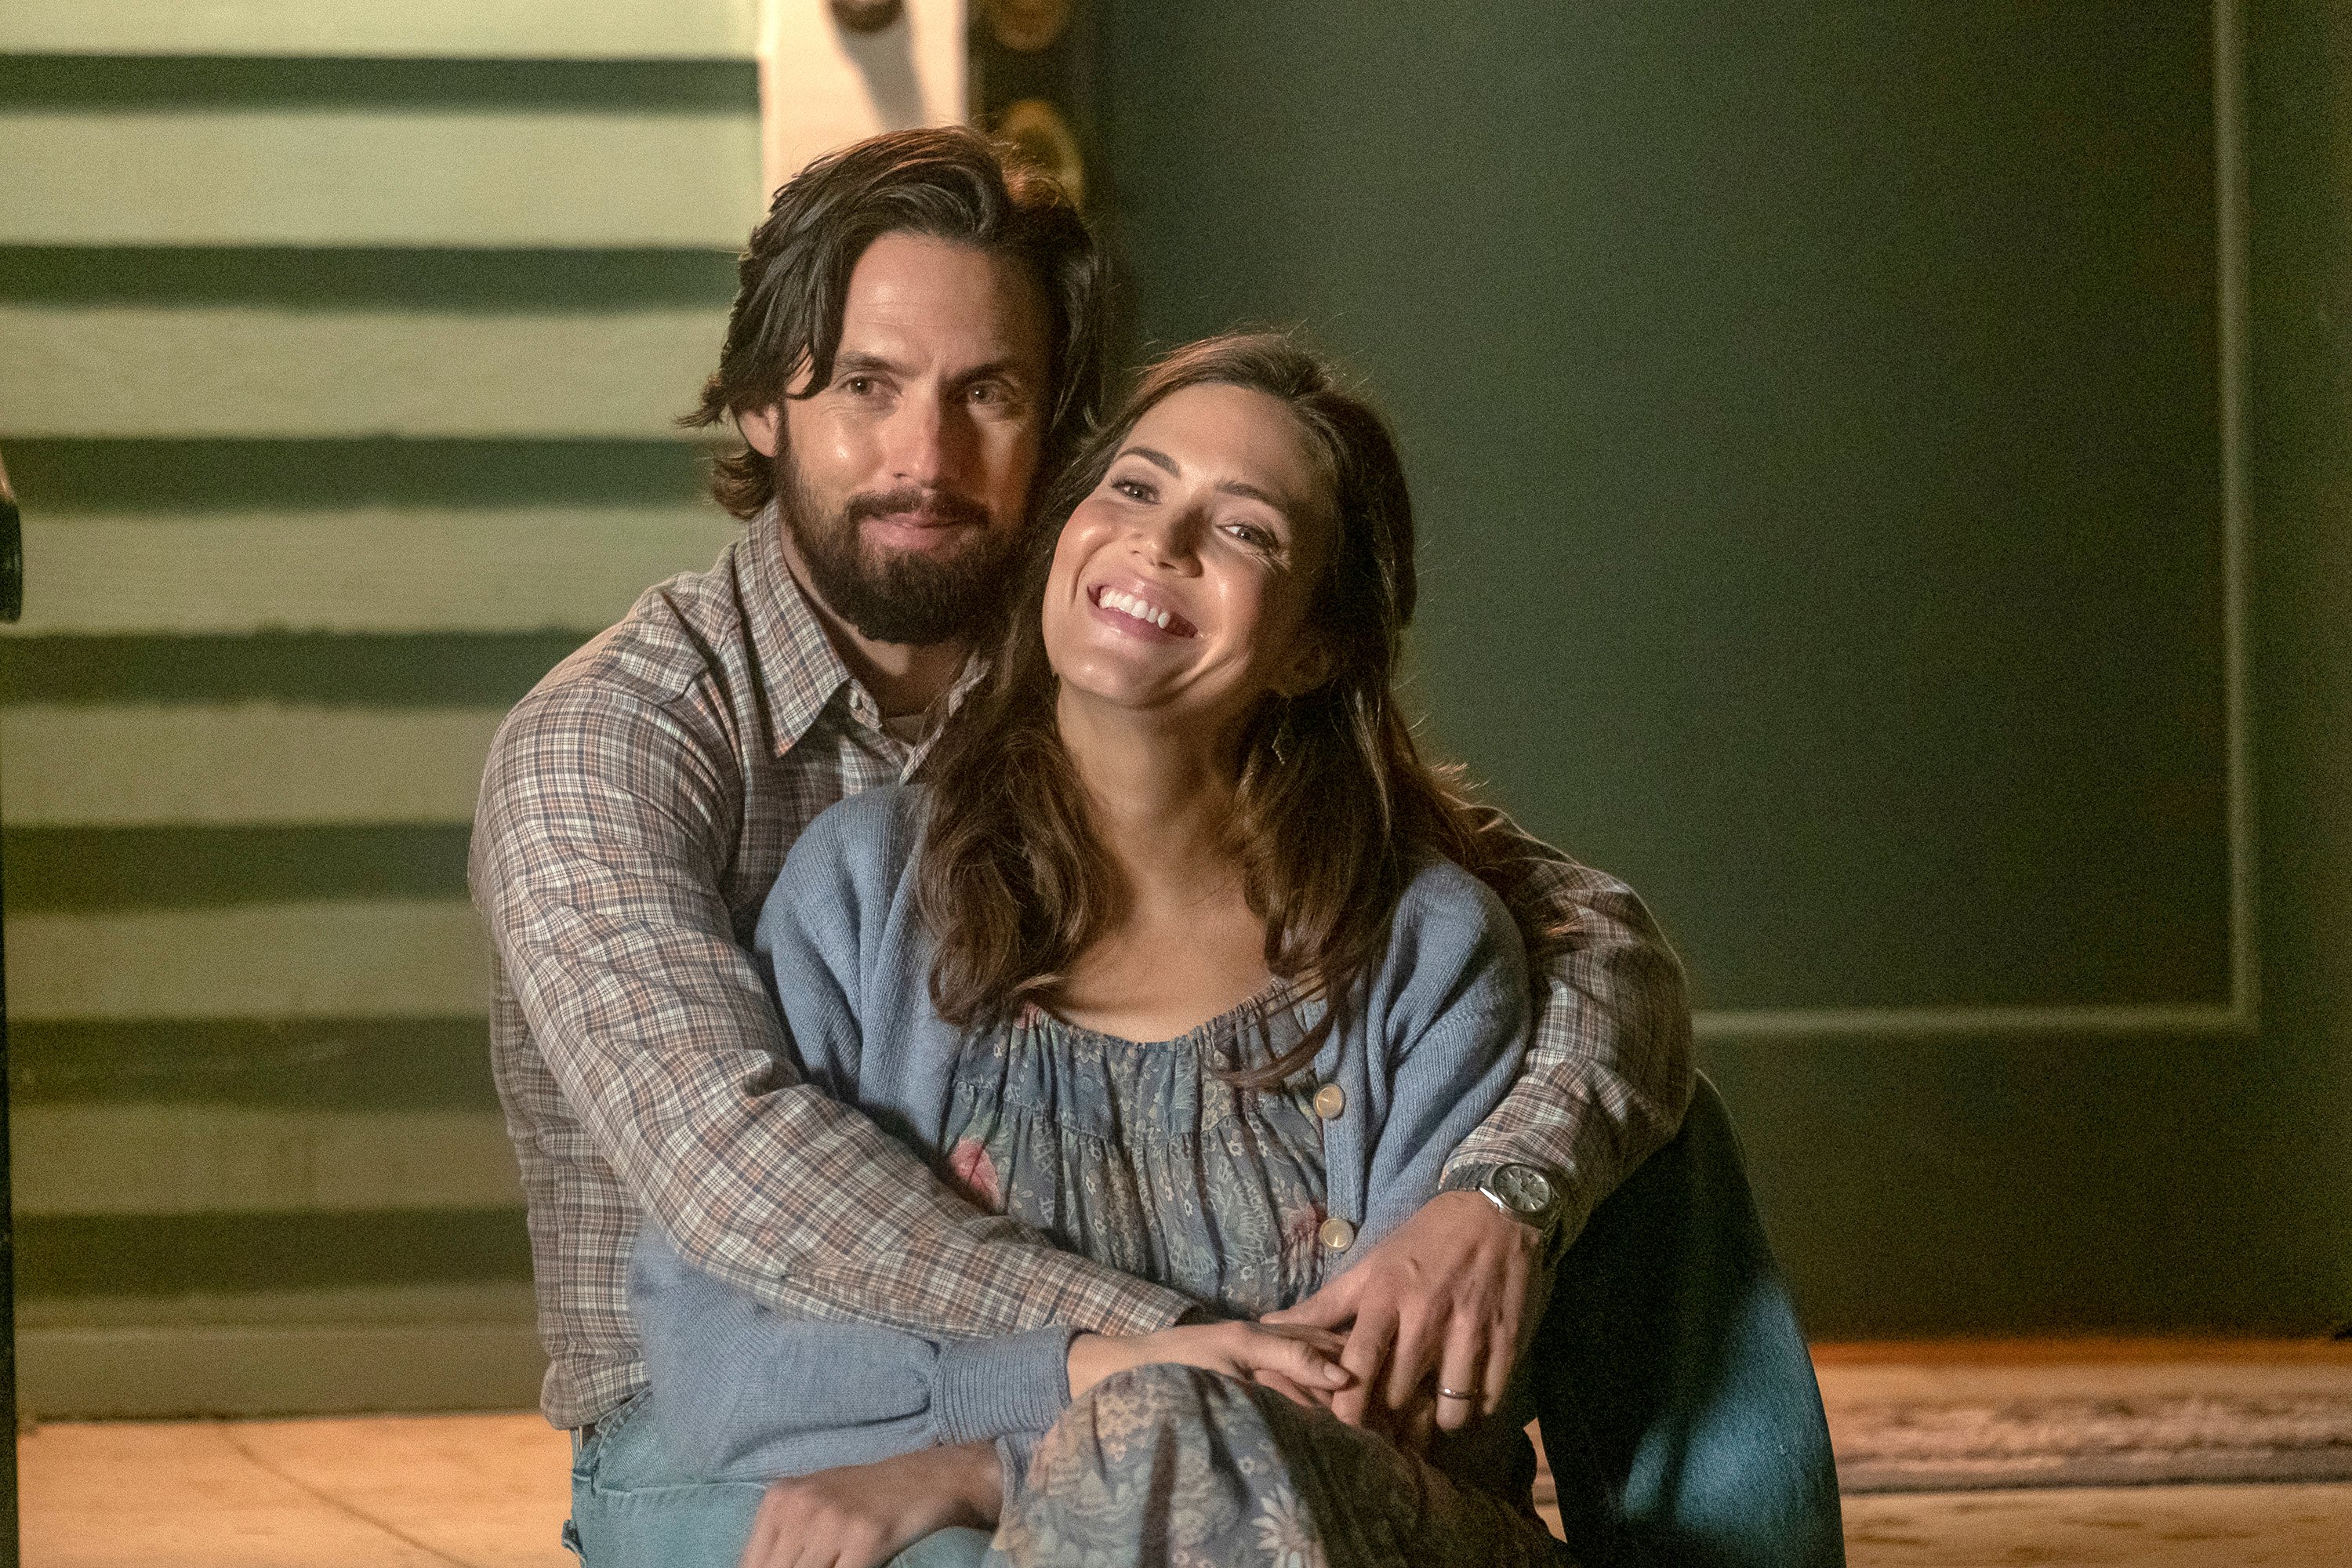 'This Is Us' Season 6 stars Milo Ventimiglia and Mandy Moore, in character as Jack and Rebecca Pearson, sit on their porch with Jack sitting behind Rebecca and his arms around her. Jack wears a light brown and white plaid long-sleeved button-up shirt and jeans. Rebecca wears a gray floral dress and a light blue cardigan.  Both characters will be a part of the ending in 'This Is Us' Season 6.